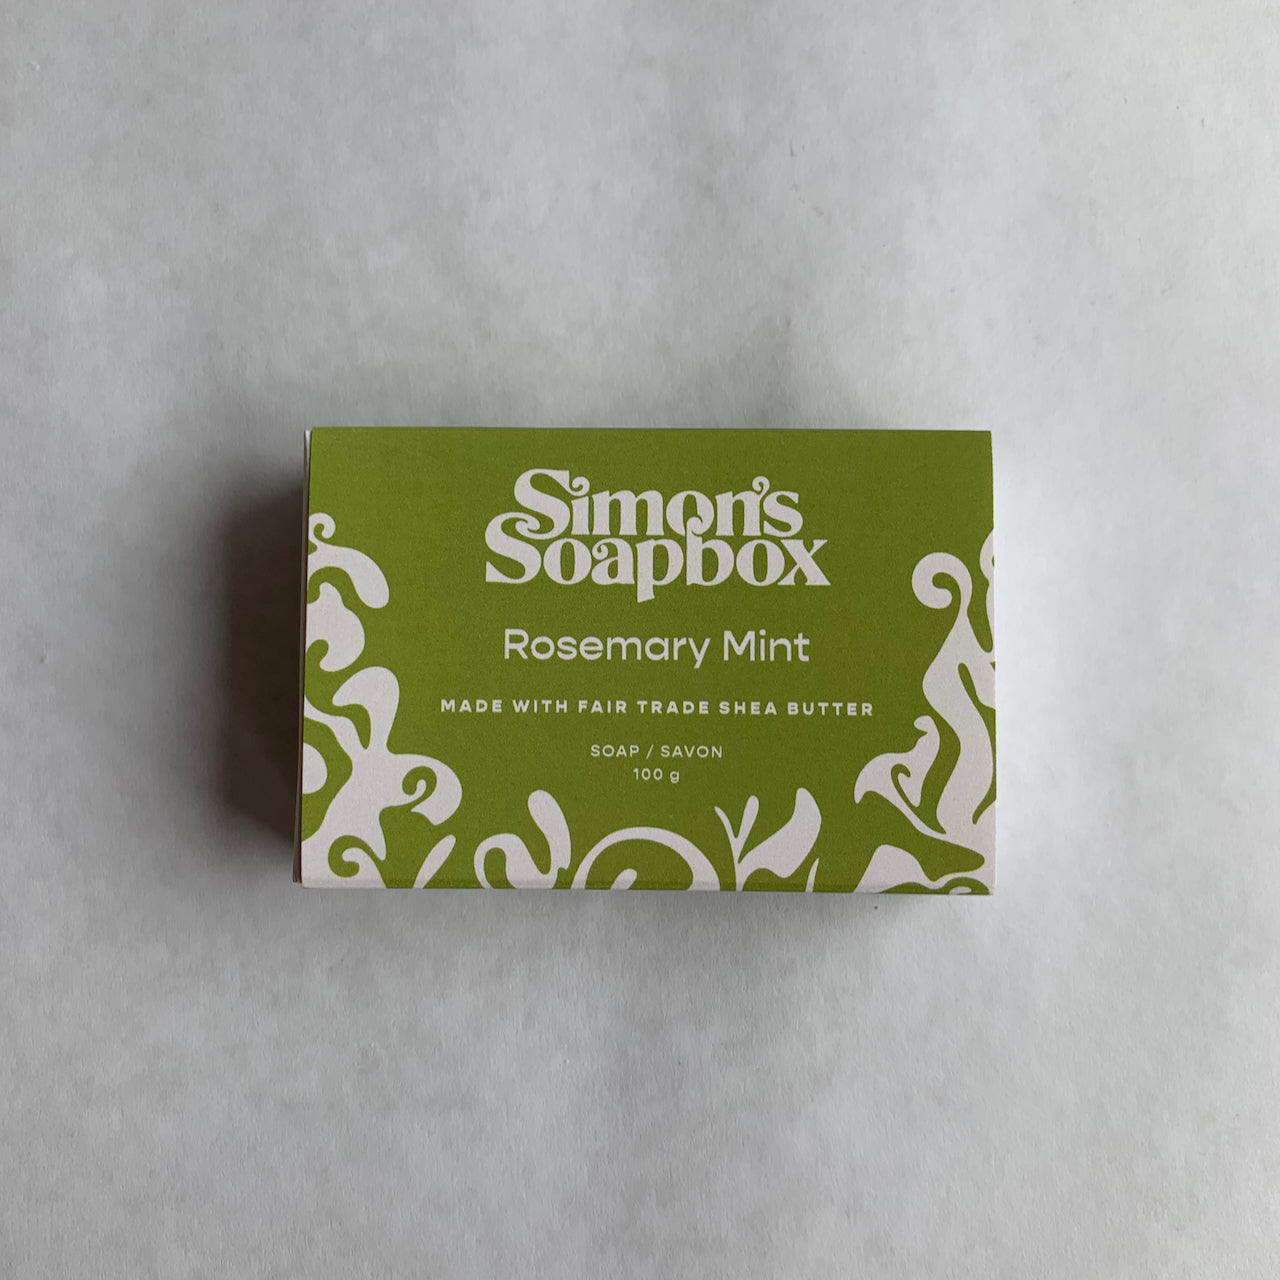 green package that reads Simon's Soapbox Rosemary Mint made with fair trade shea butter soap/savon 100 g